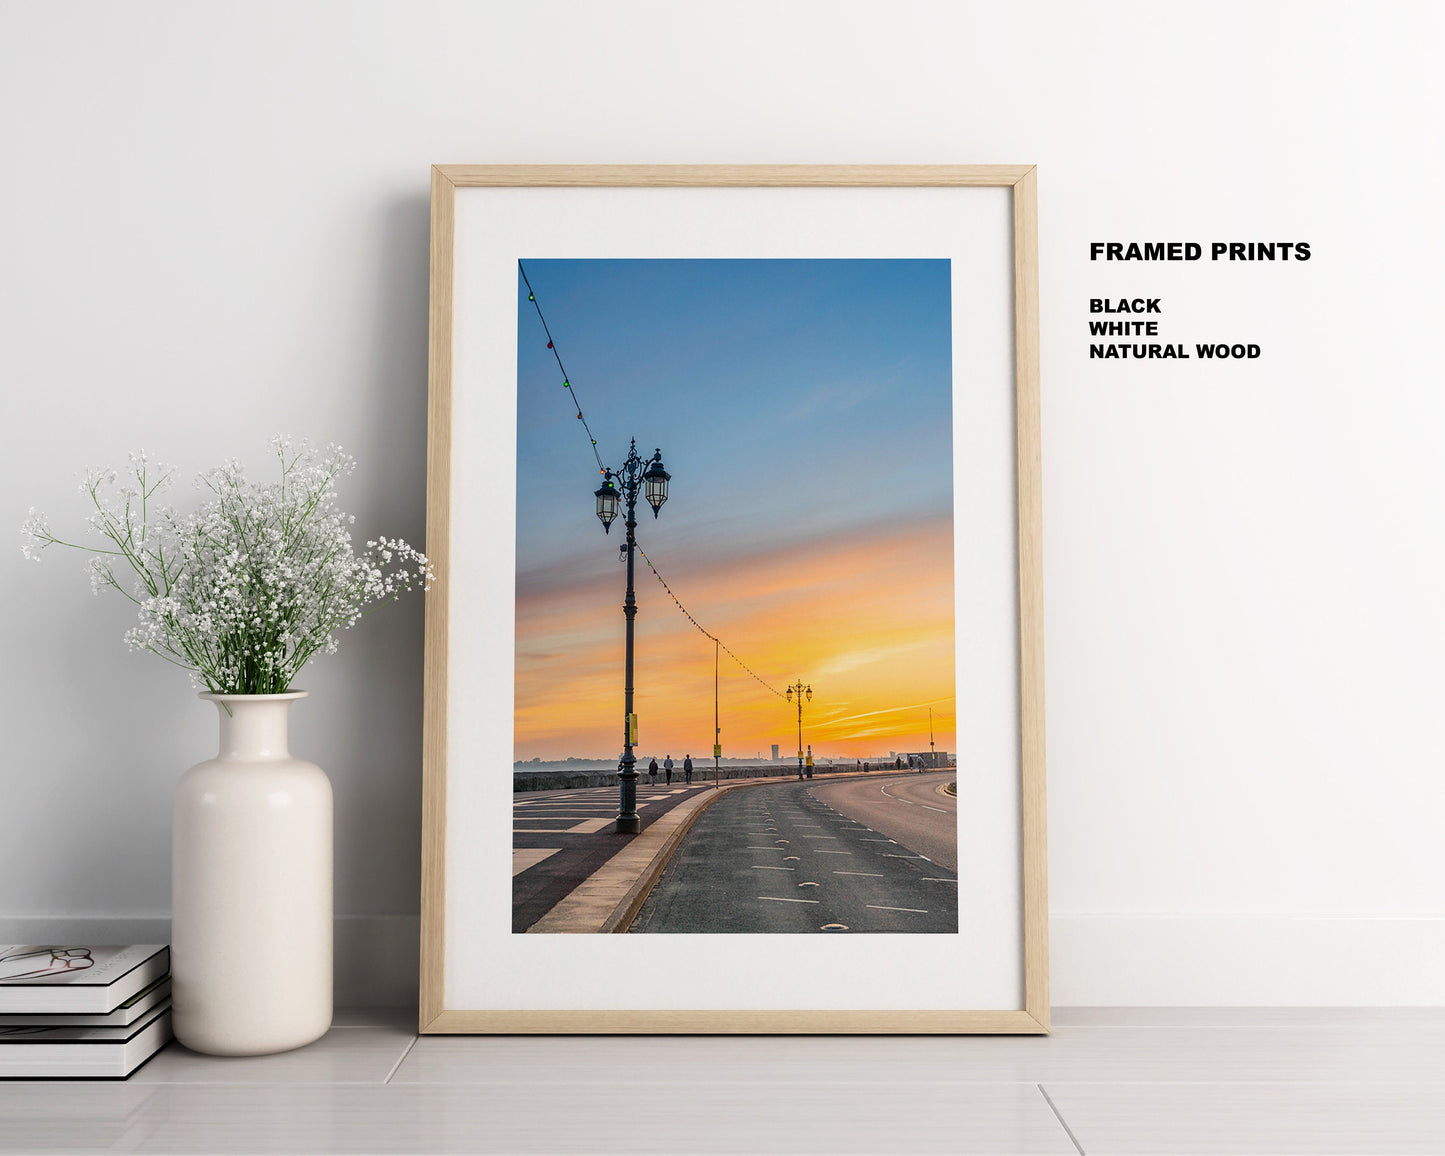 Southsea Seafront - Photography Print - Portsmouth and Southsea Prints - Wall Art -  Frame and Canvas Options - Portrait